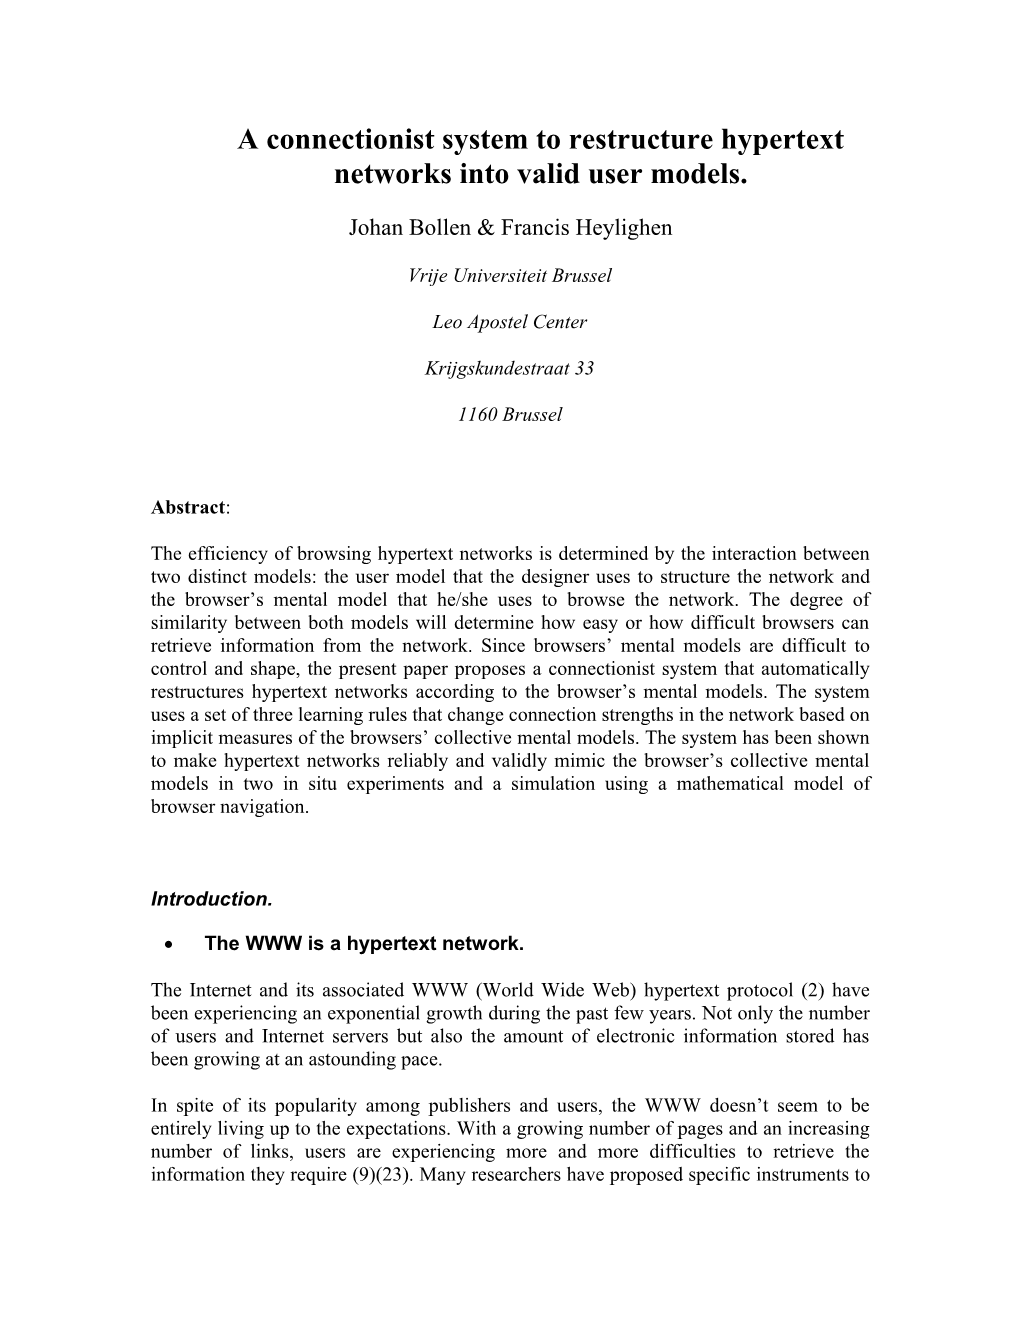 A Connectionist System to Restructure Hypertext Networks Into Valid User Models